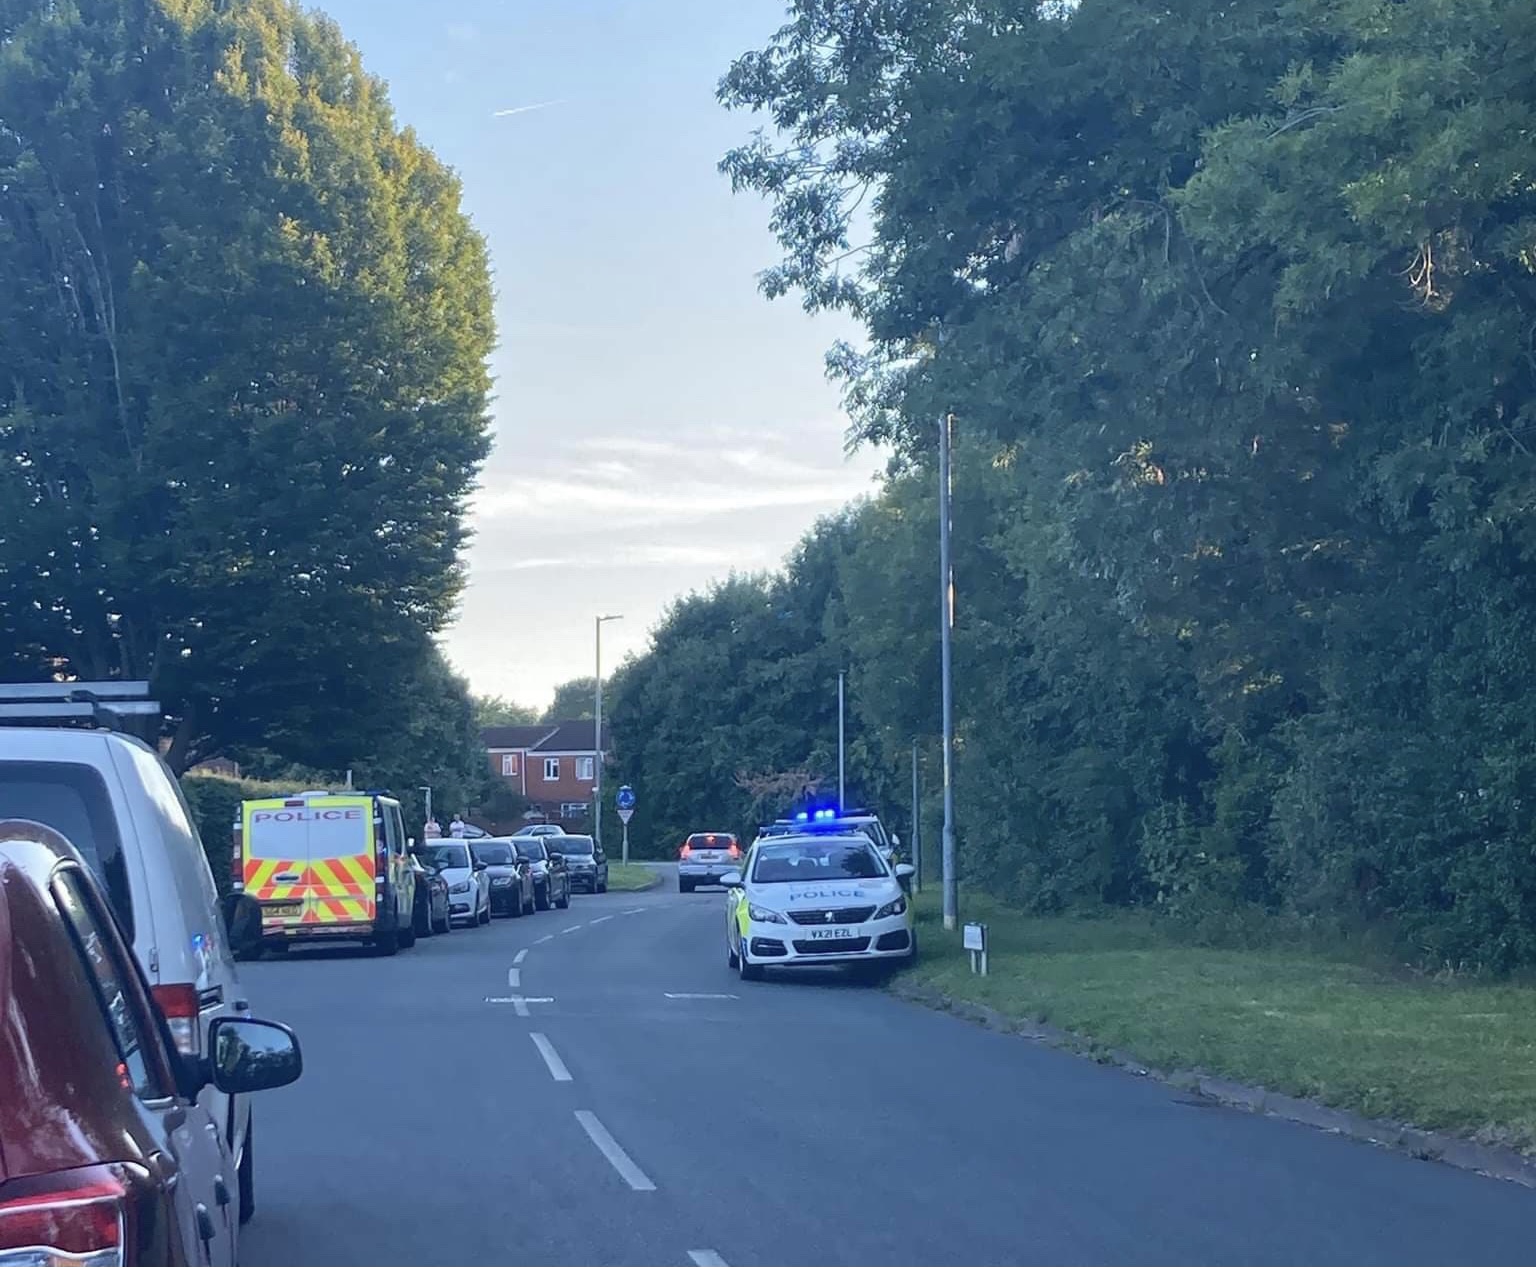 NEWS | Large police presence reported in an area of Hereford this evening